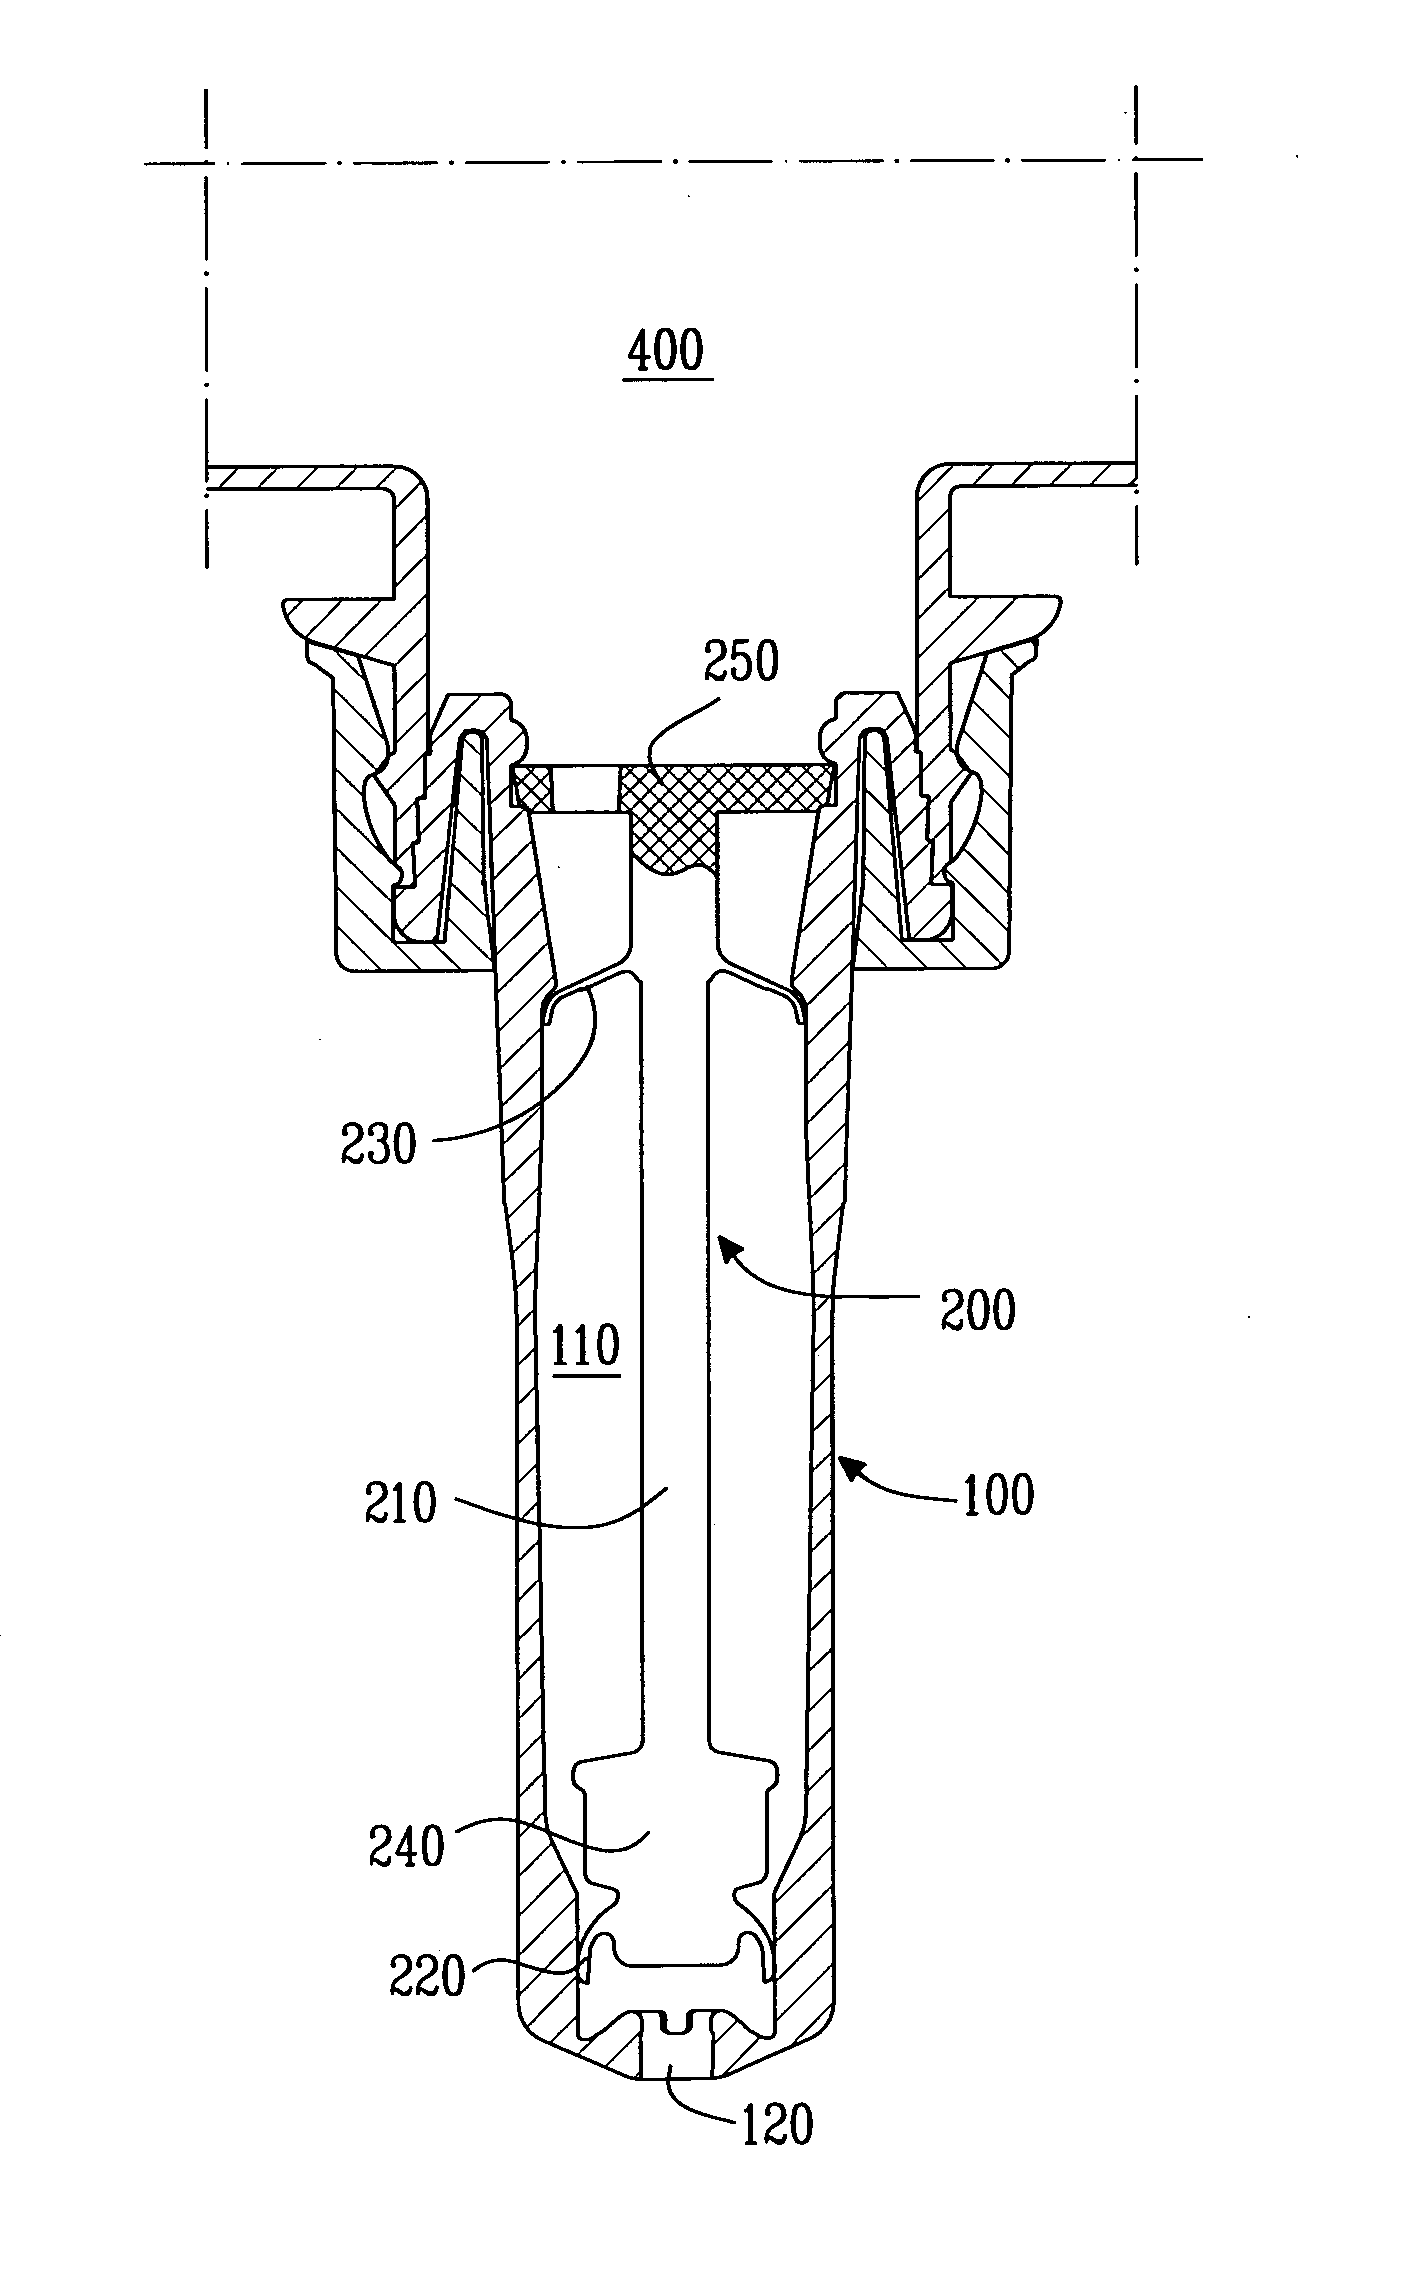 Disposable pump, a dispensing system comprising a pump and a method for dispensing liquid